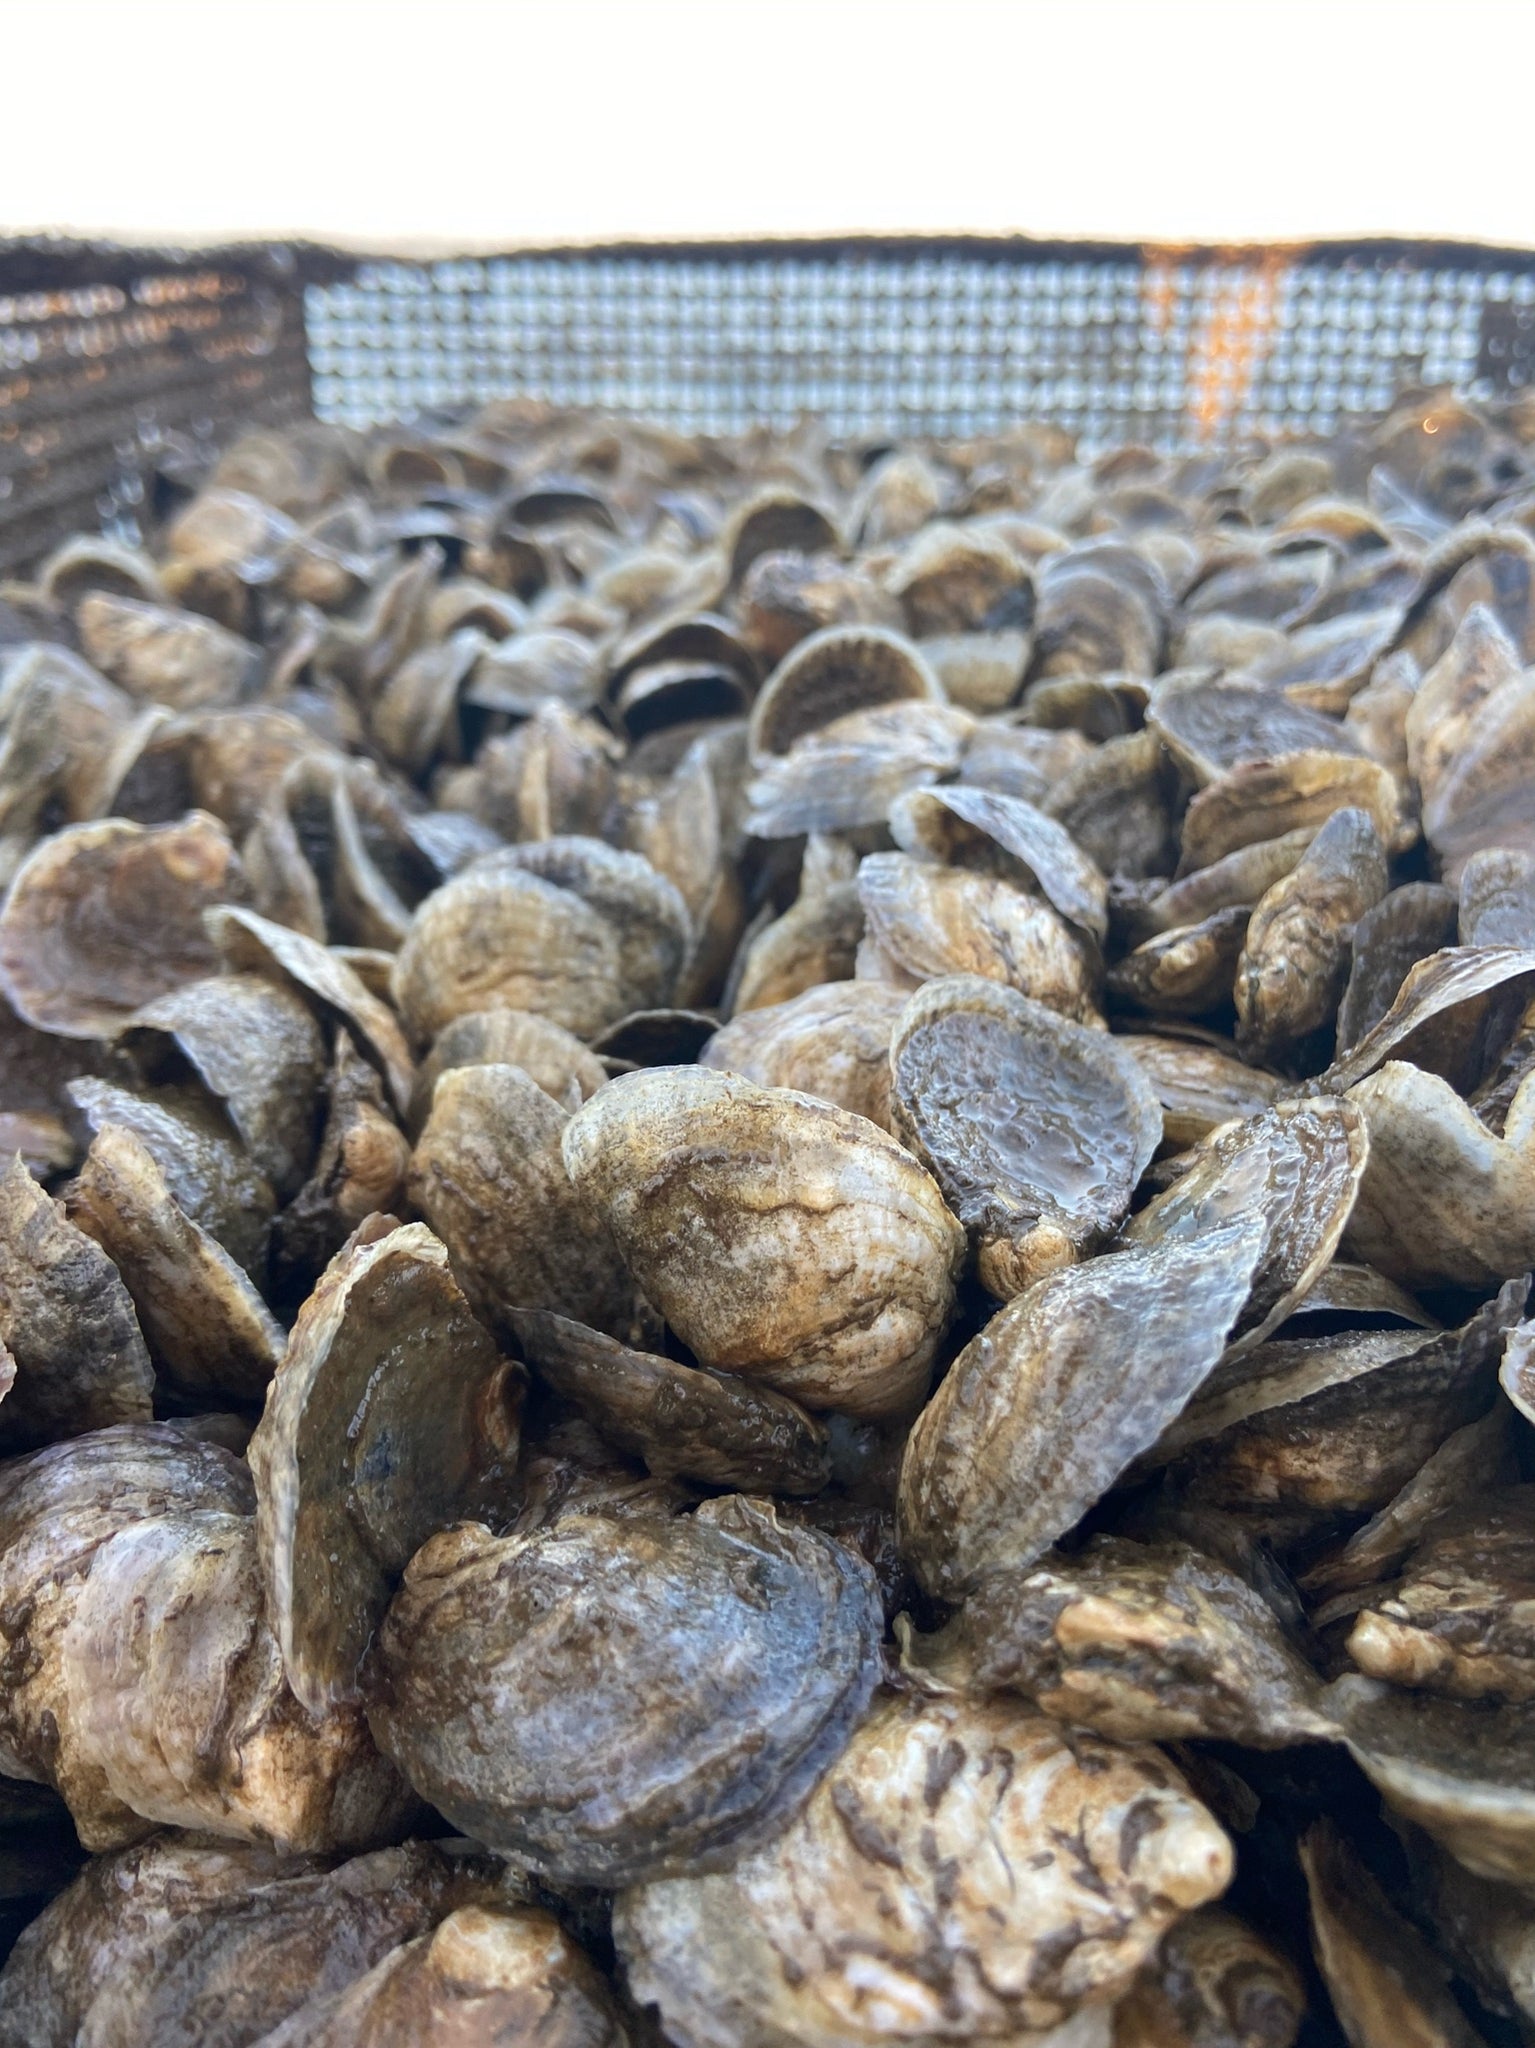 Recycling Oyster Shells: Why and How